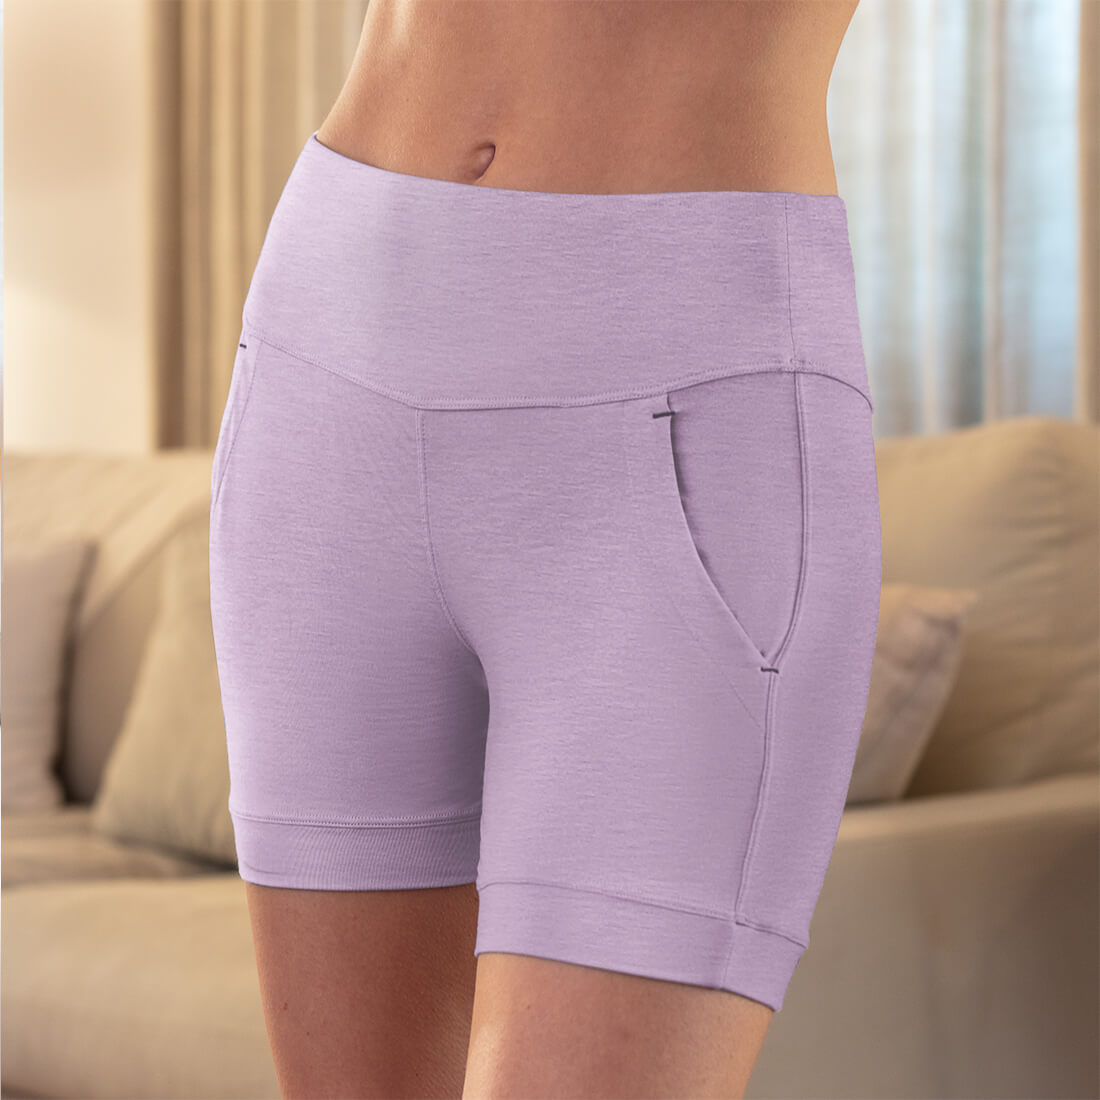 Isabelle Moon  Incredibly Comfortable & Functional Yoga Wear